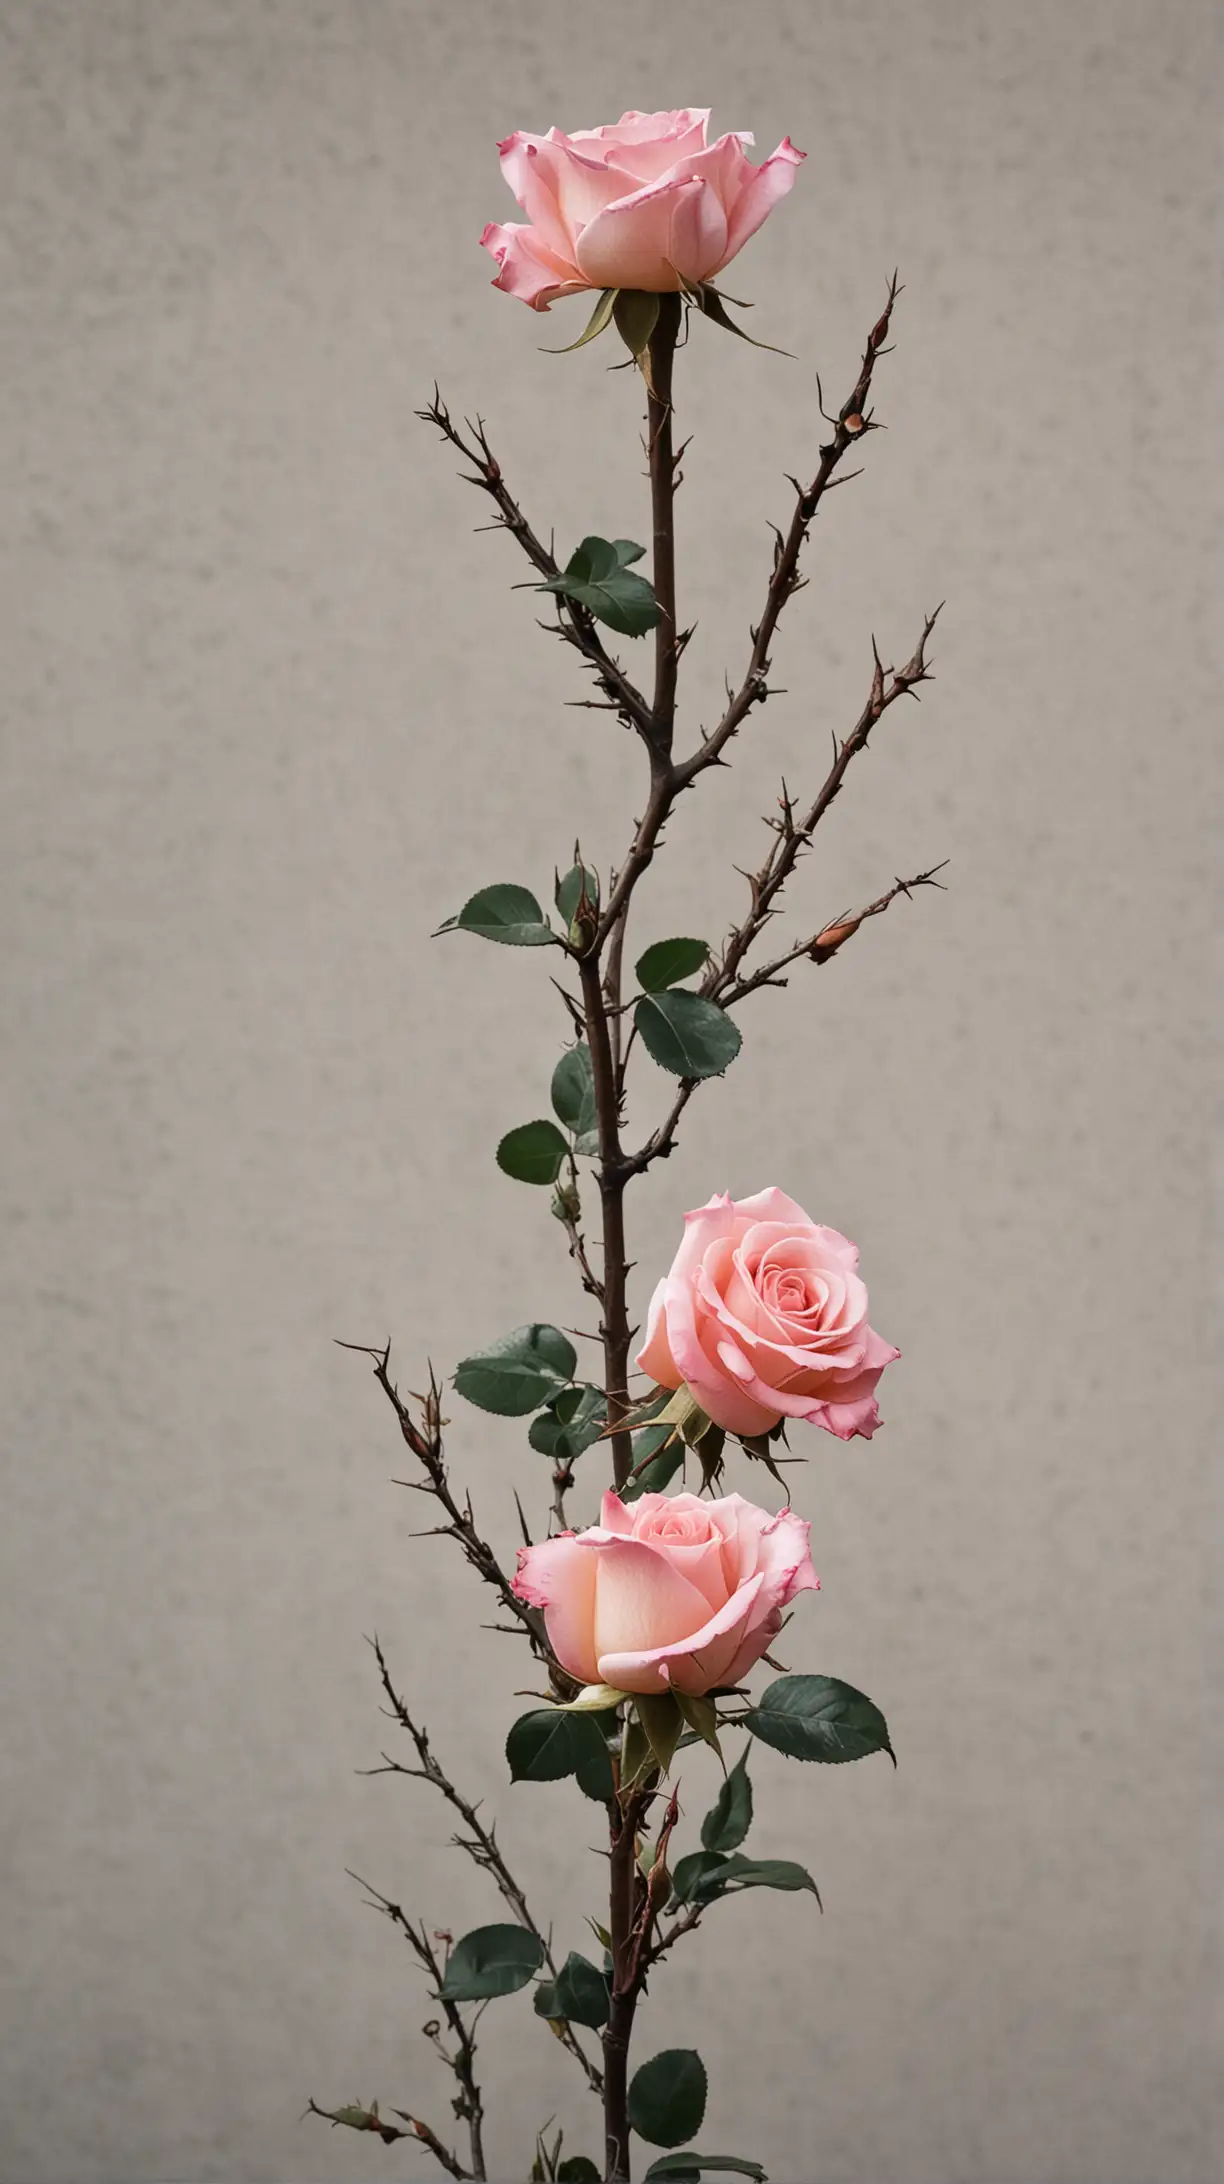 Vibrant Roses with Thorn Accents A Captivating Floral Display